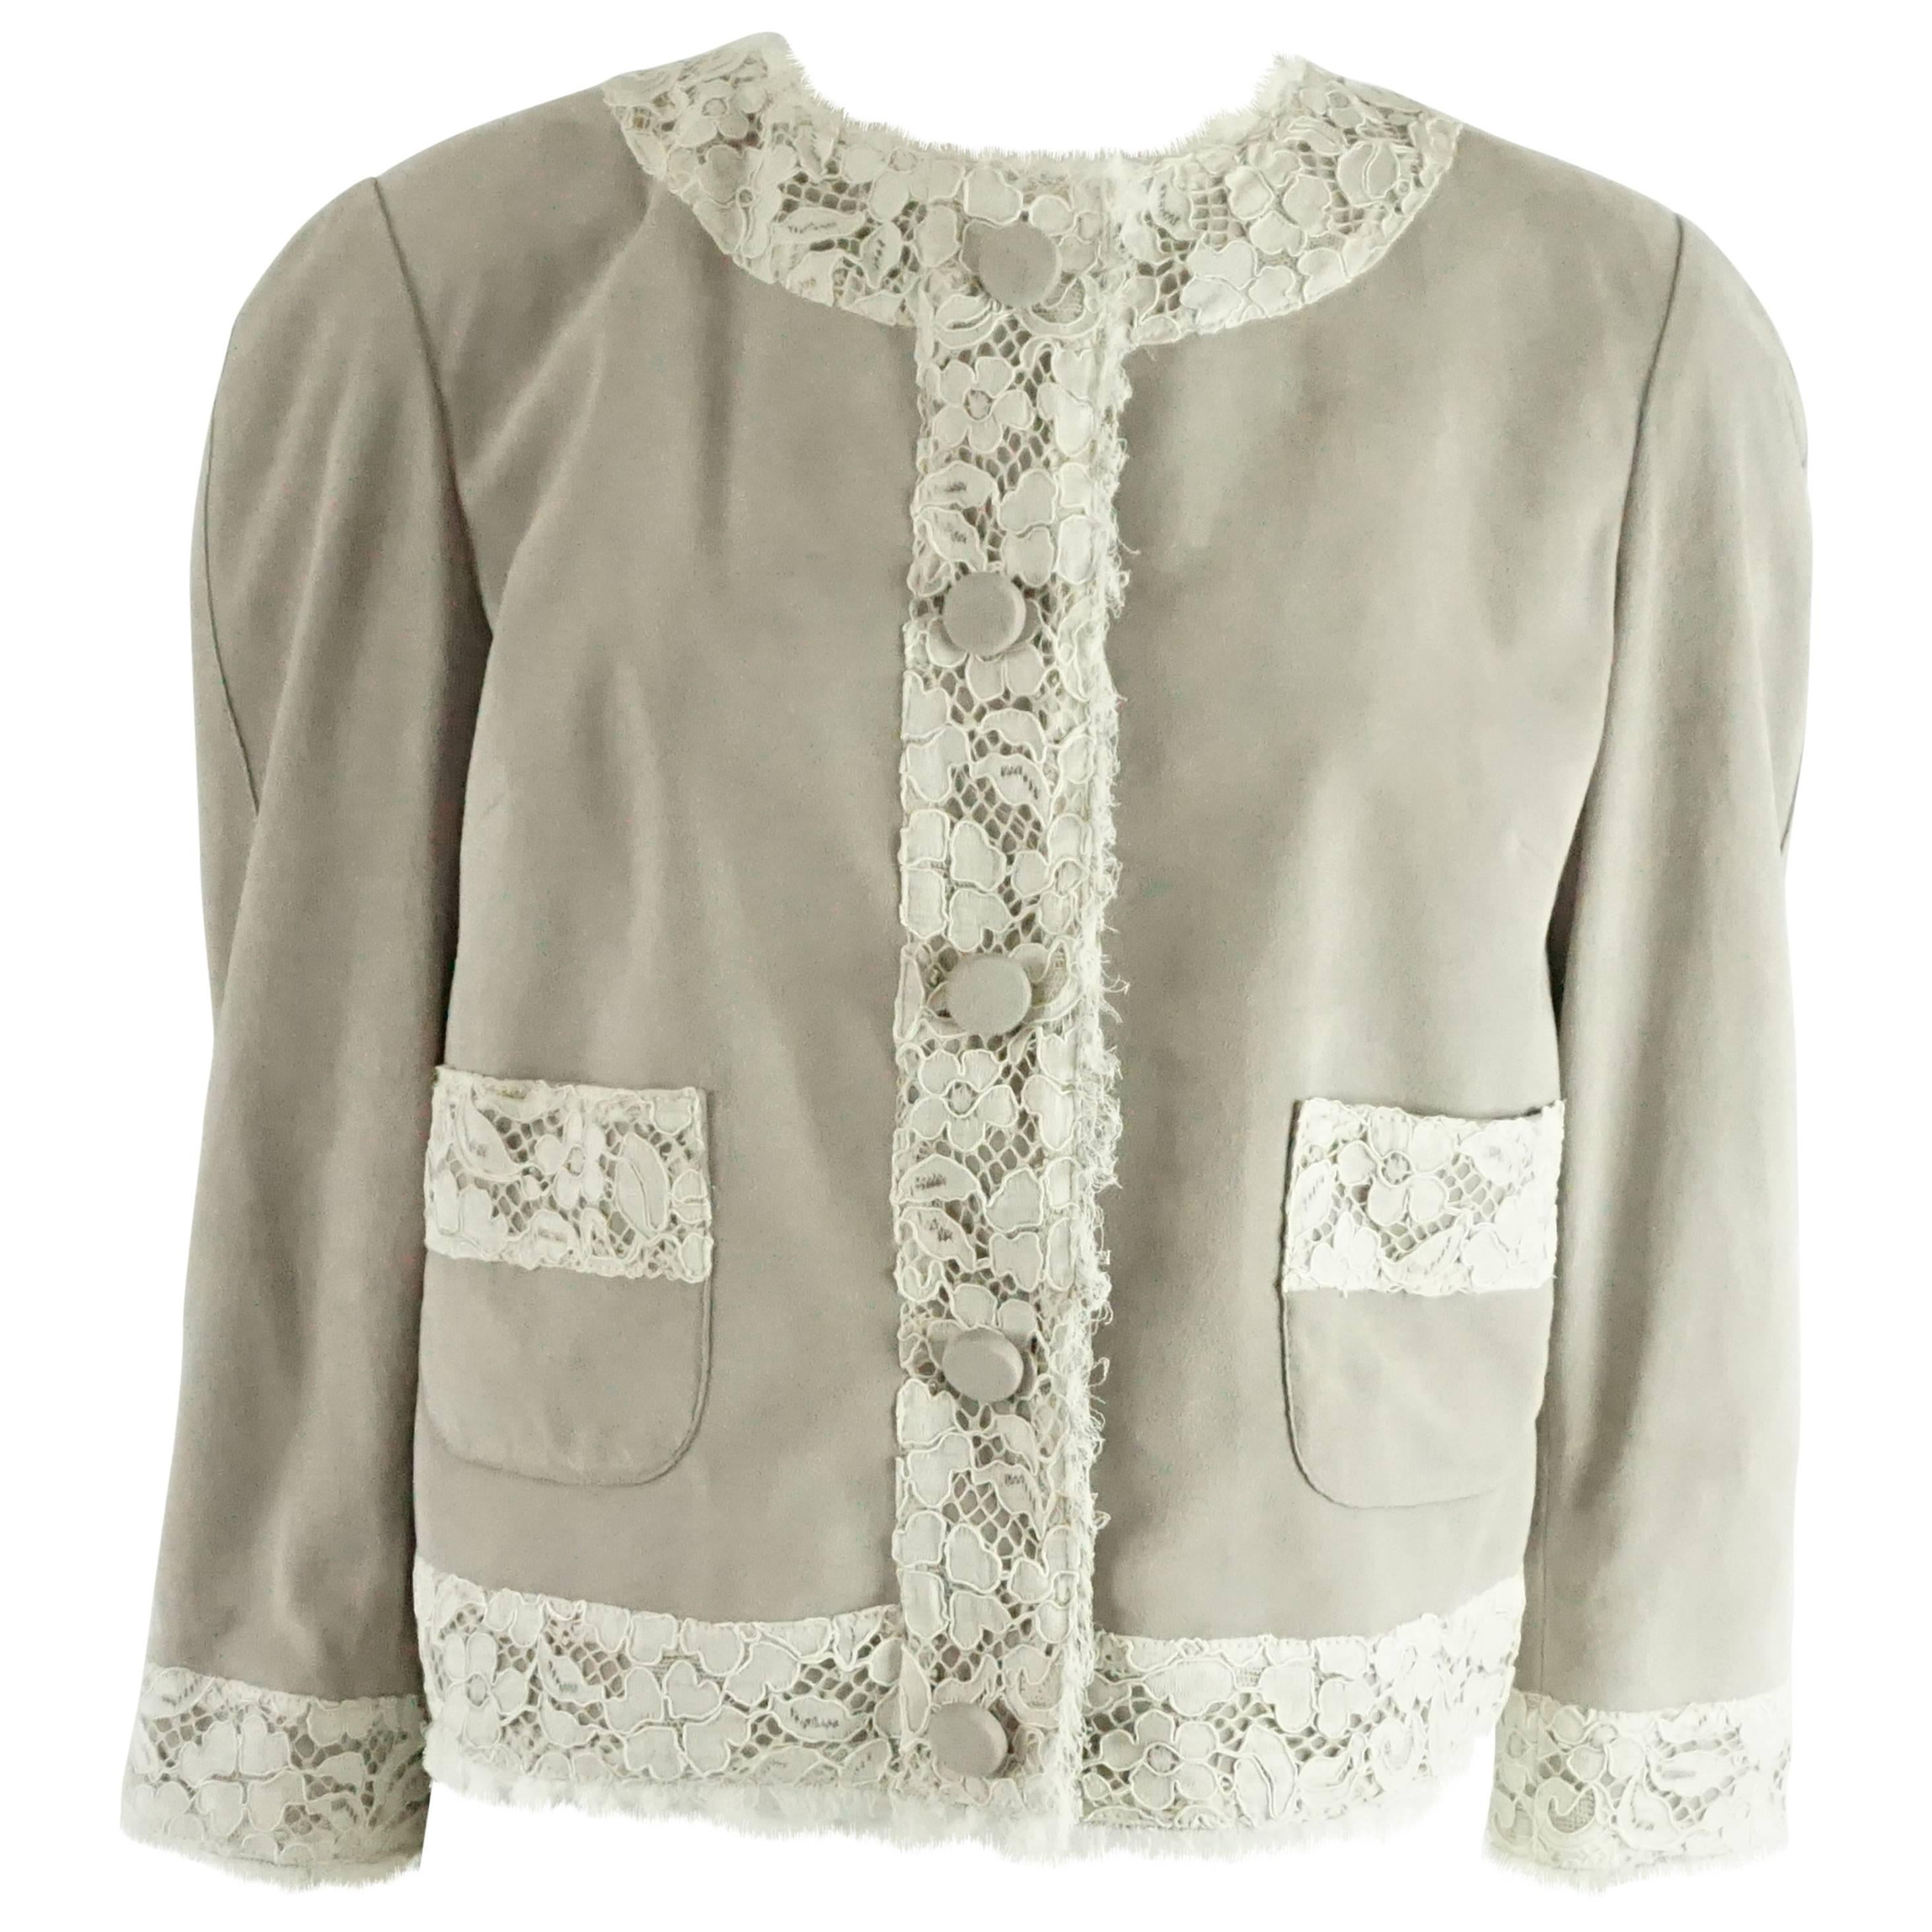 Dolce & Gabbana Gray Suede with Ivory Lace Trim Jacket - Size 42 Circa 2000